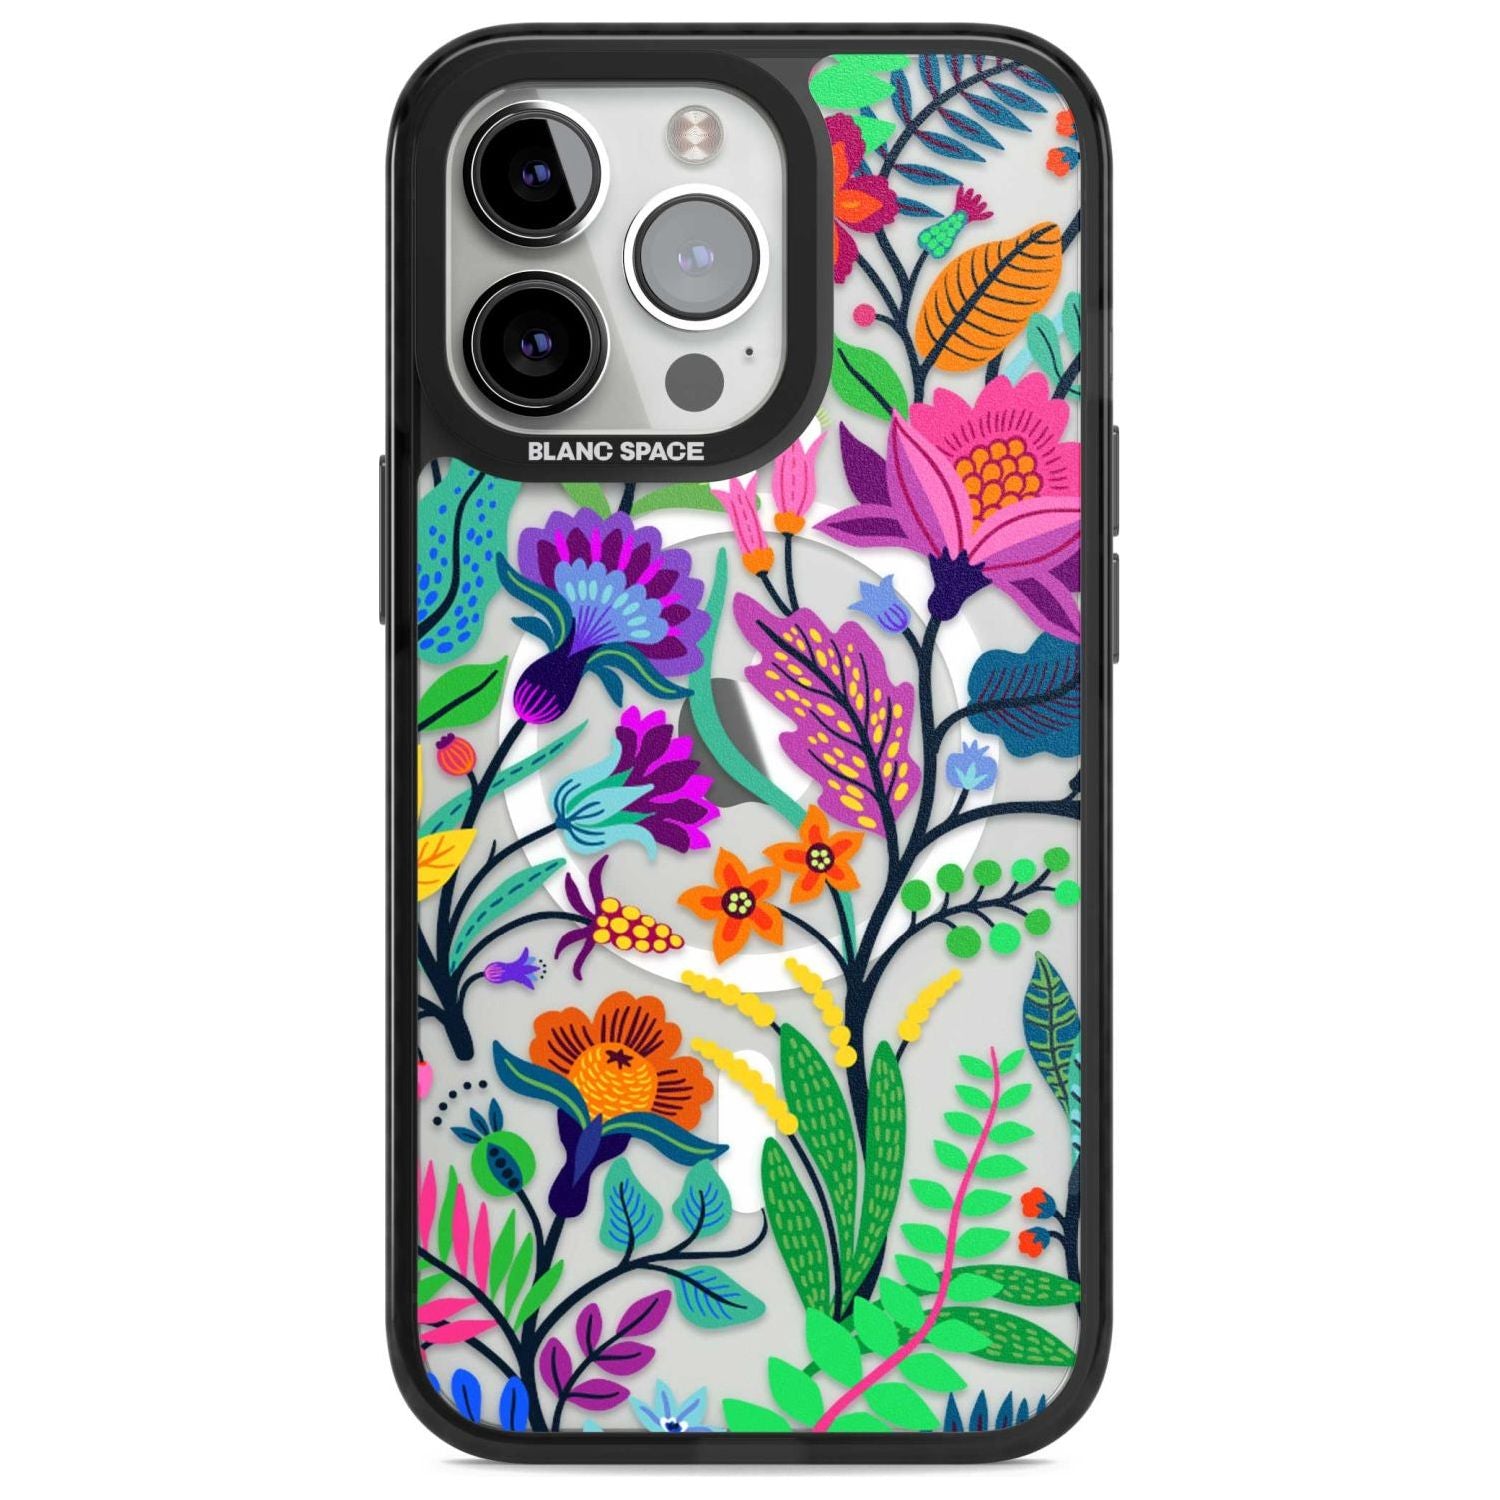 Floral Vibe Phone Case iPhone 15 Pro Max / Magsafe Black Impact Case,iPhone 15 Pro / Magsafe Black Impact Case,iPhone 14 Pro Max / Magsafe Black Impact Case,iPhone 14 Pro / Magsafe Black Impact Case,iPhone 13 Pro / Magsafe Black Impact Case Blanc Space